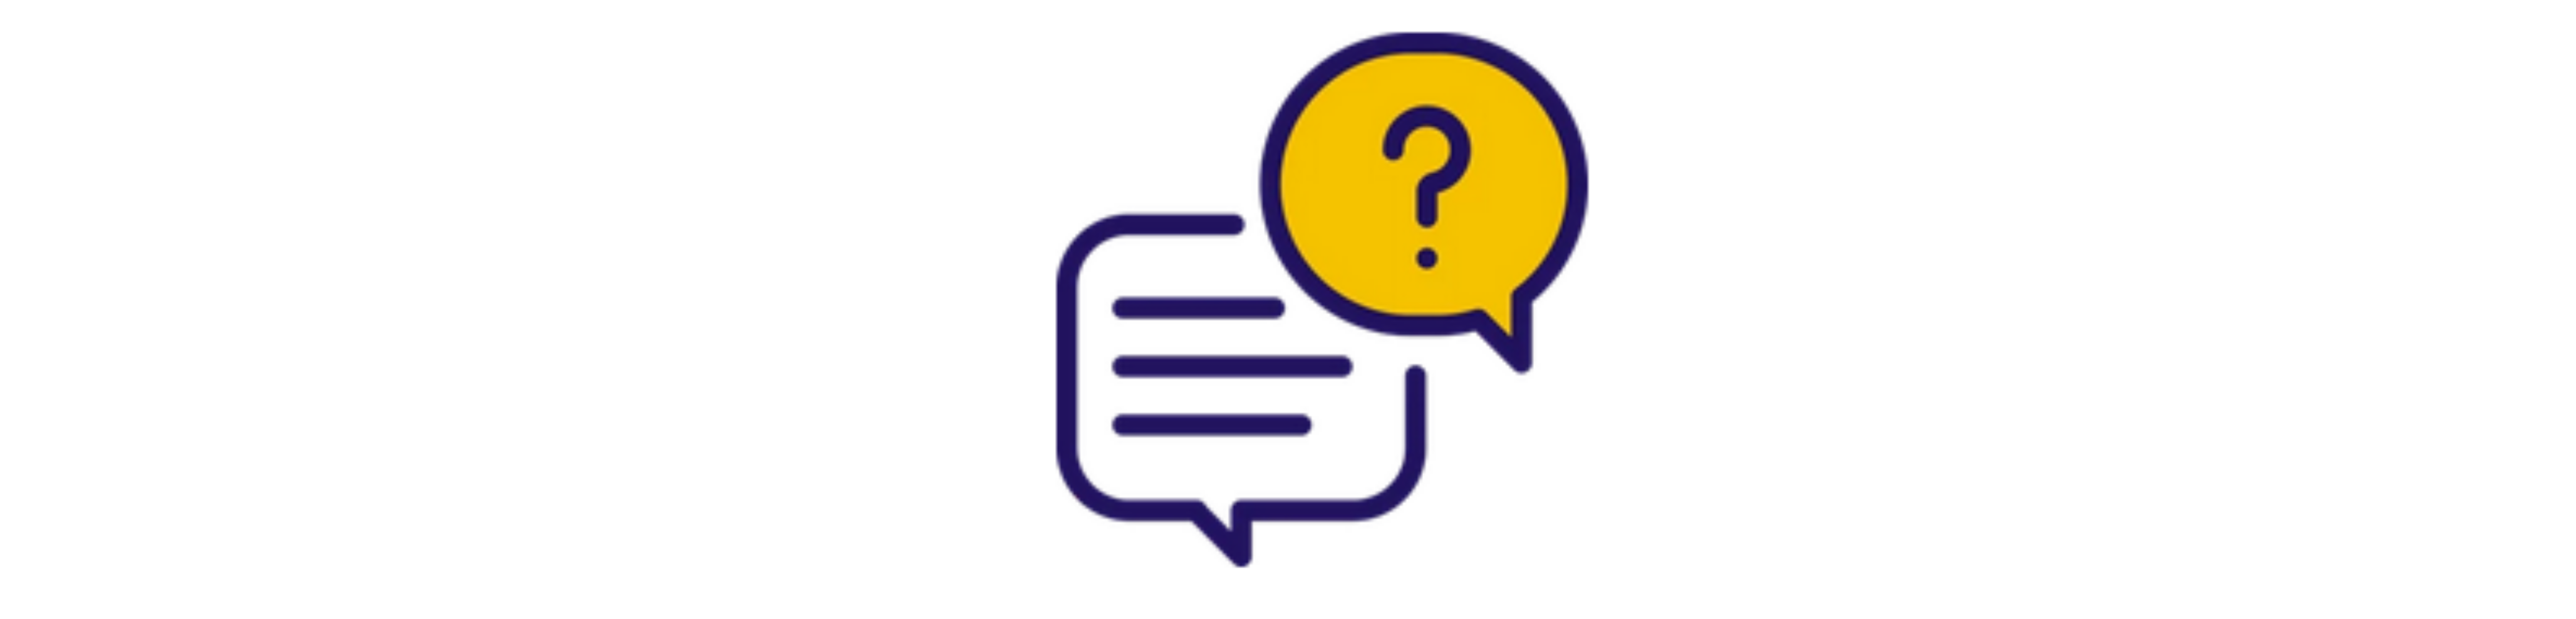 Question - answer icon